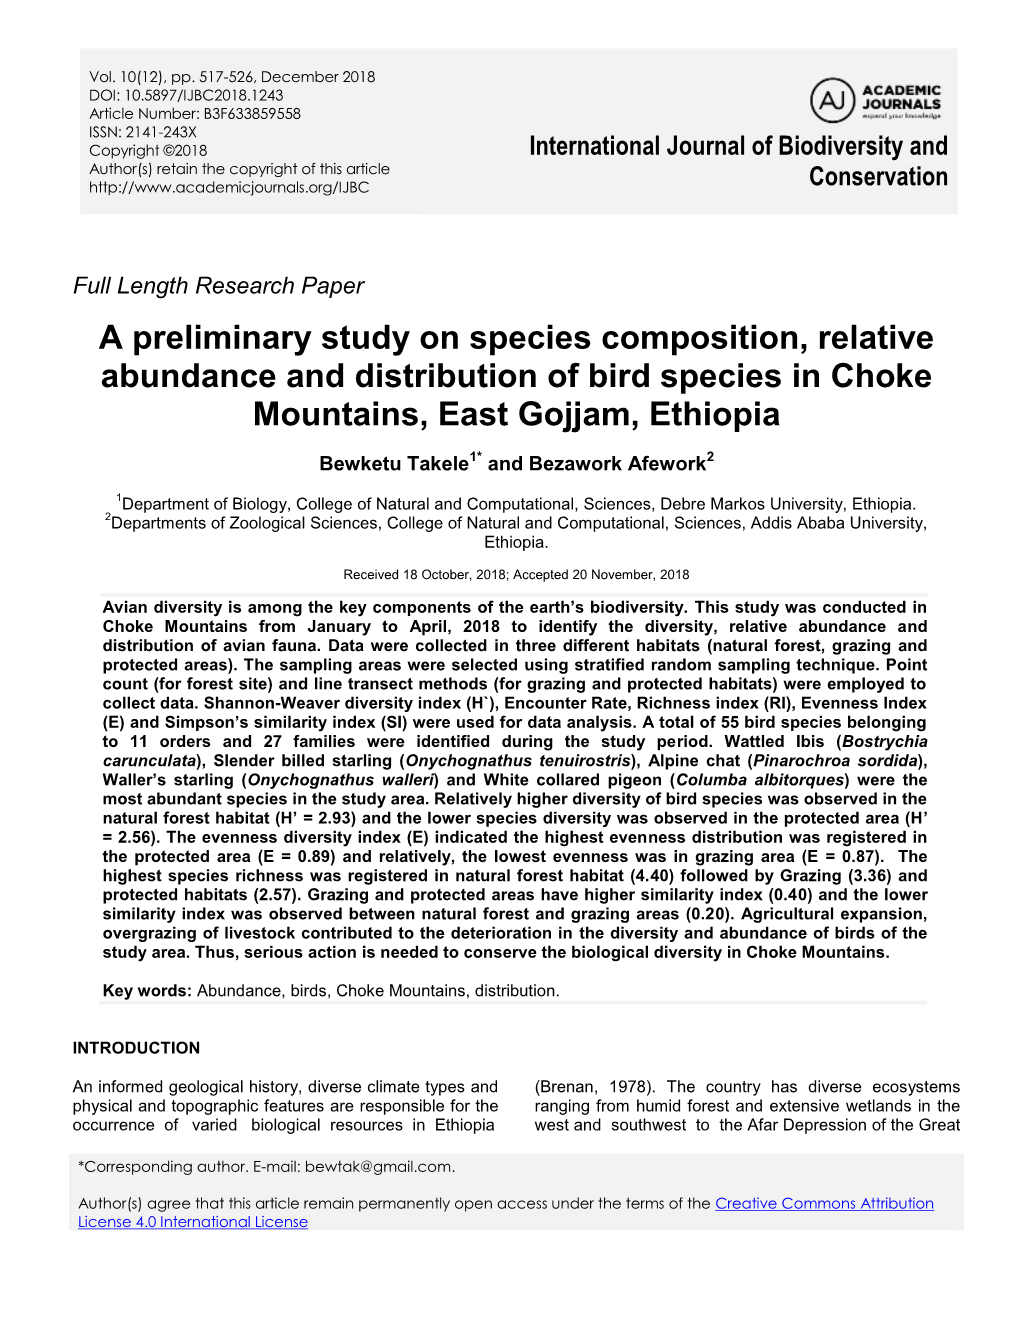 A Preliminary Study on Species Composition, Relative Abundance and Distribution of Bird Species in Choke Mountains, East Gojjam, Ethiopia